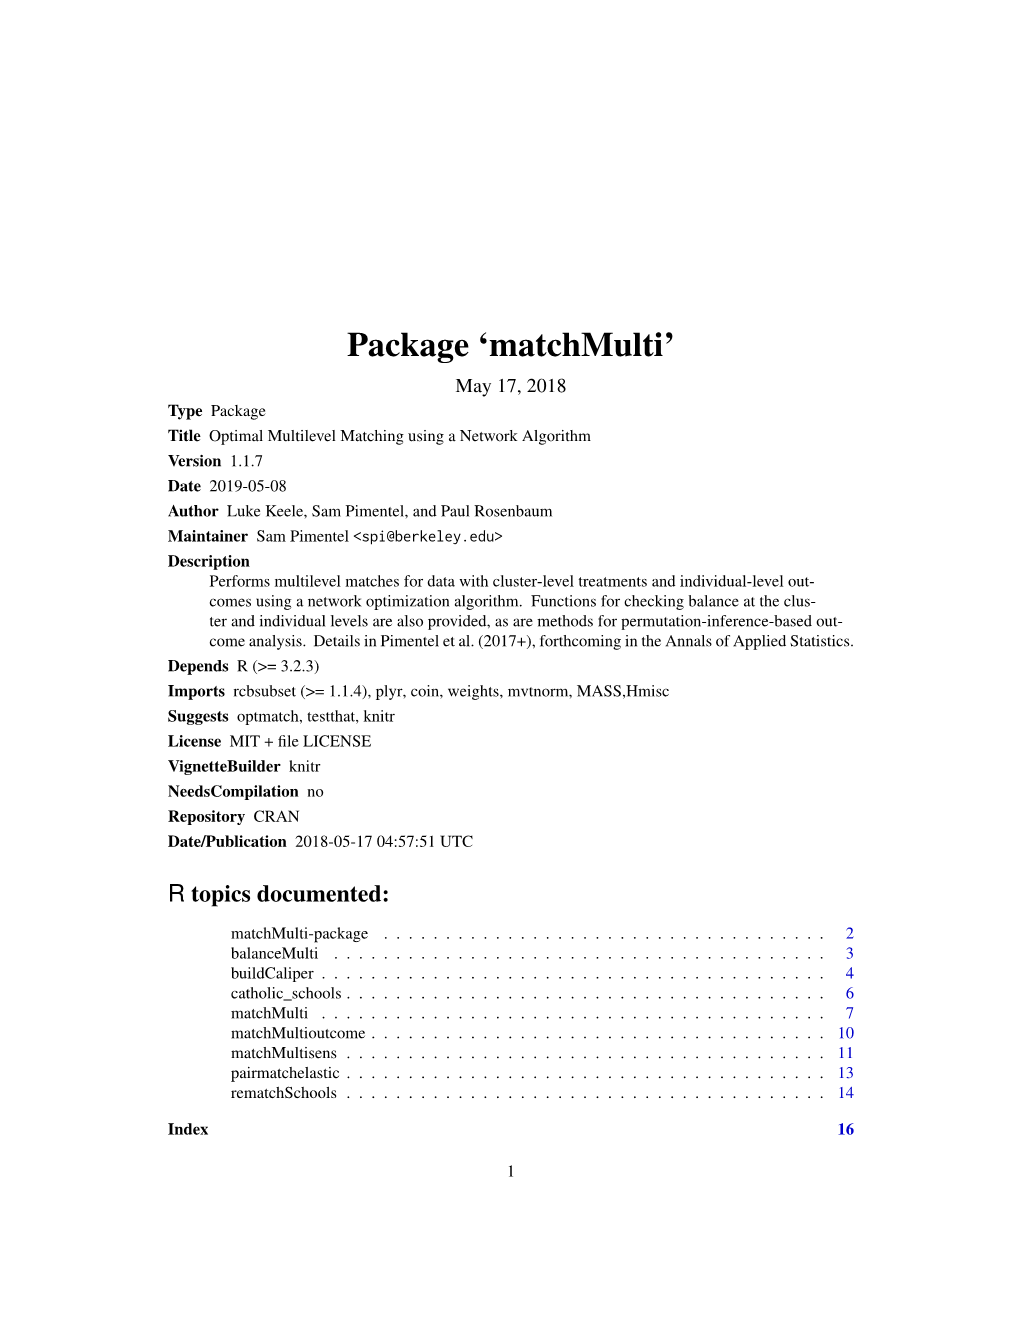 Package 'Matchmulti'